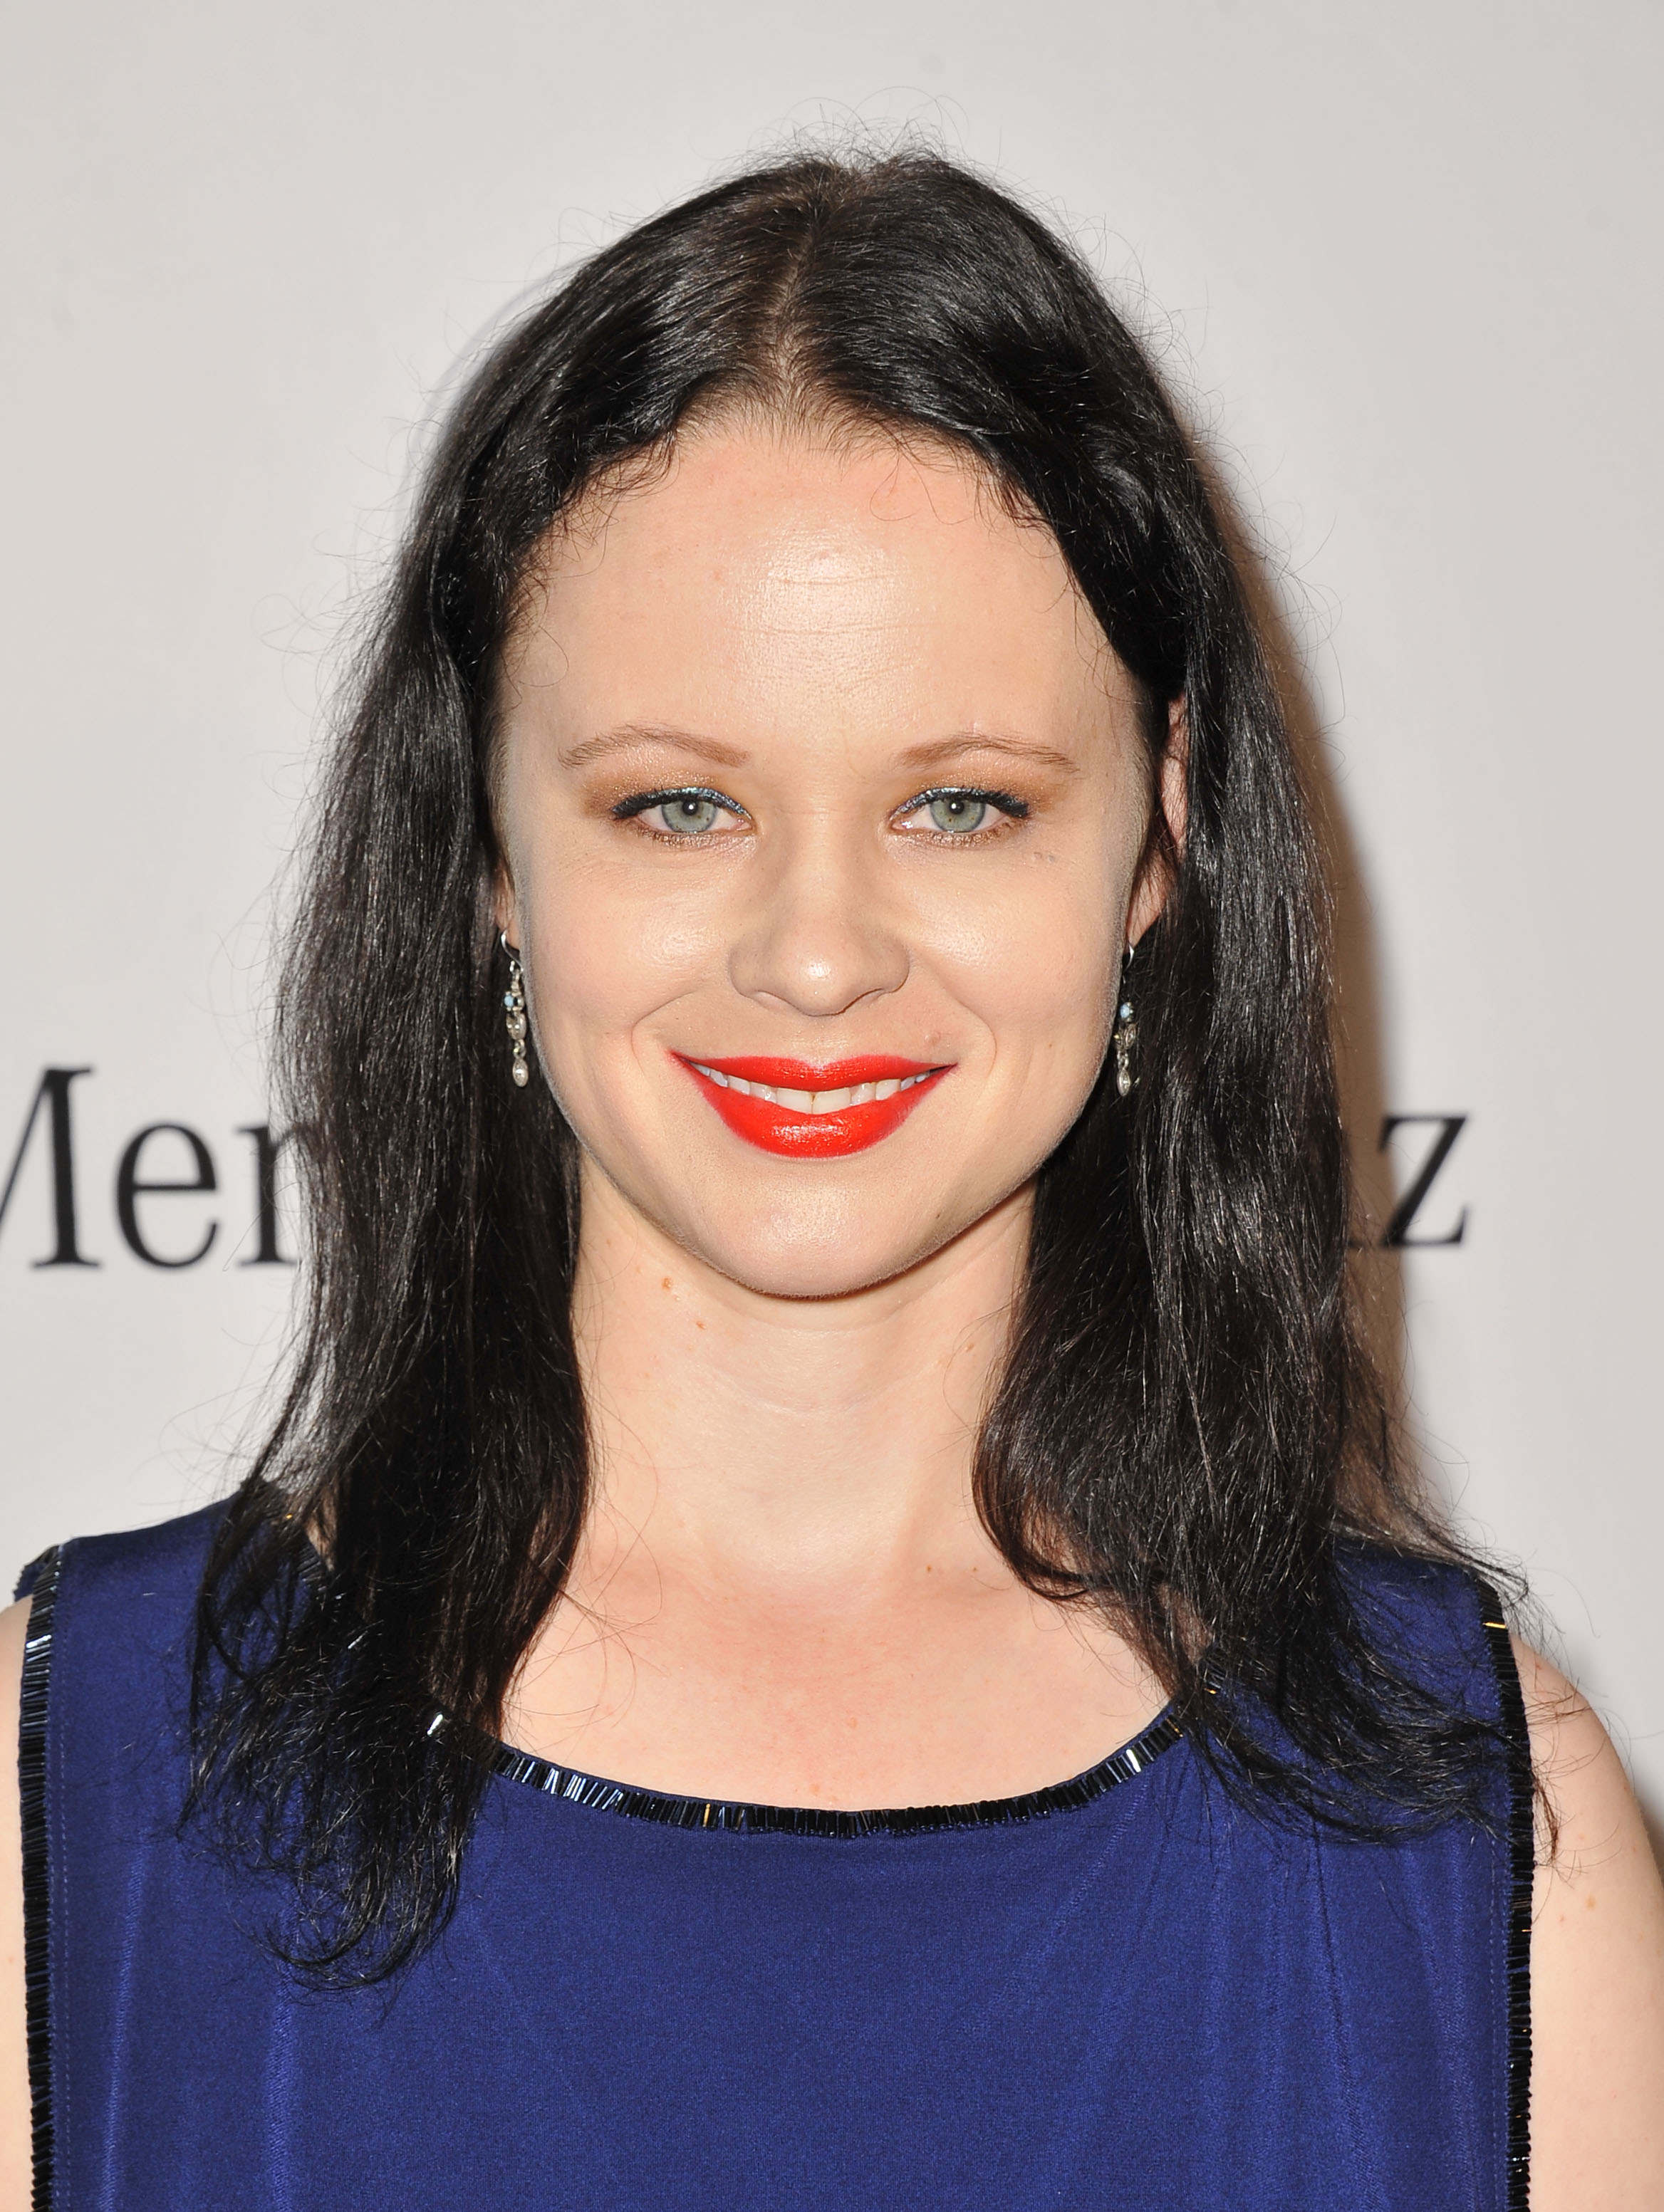 Thora Birch Images on Fanpop.